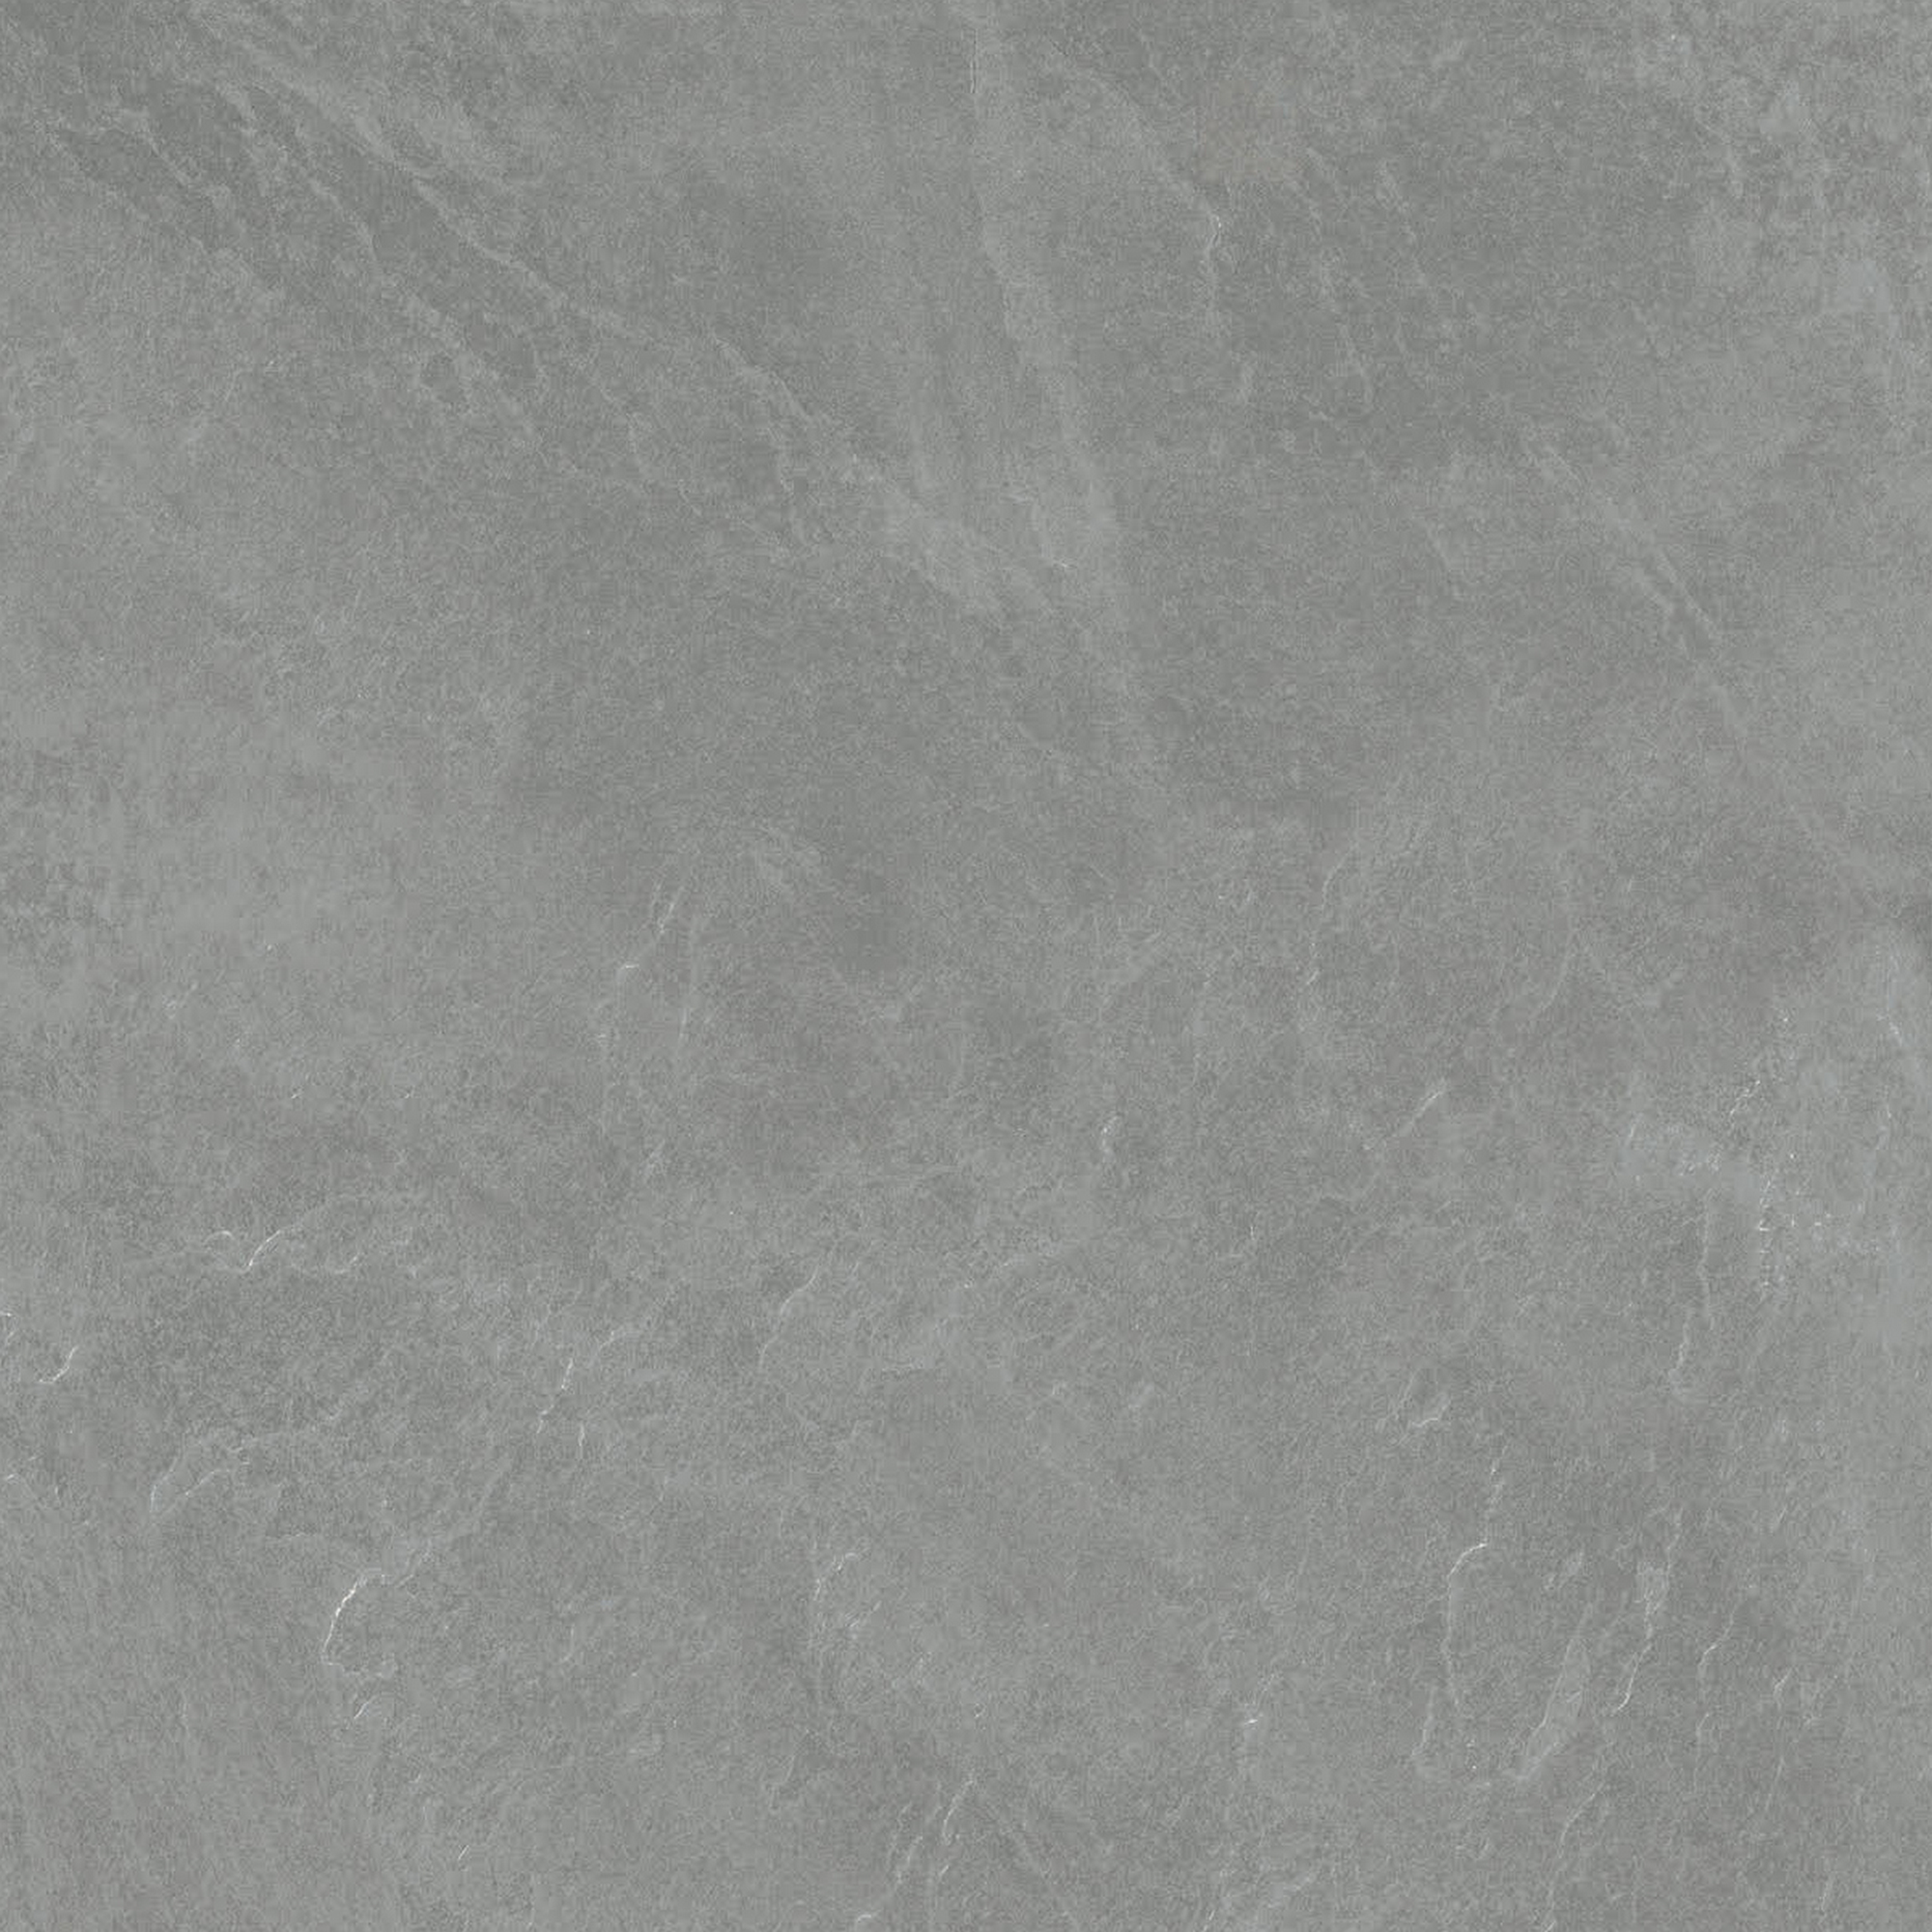 Bodenfliese 'Mustang' Feinsteinzeug grau 60 x 60 x 2 cm + product picture